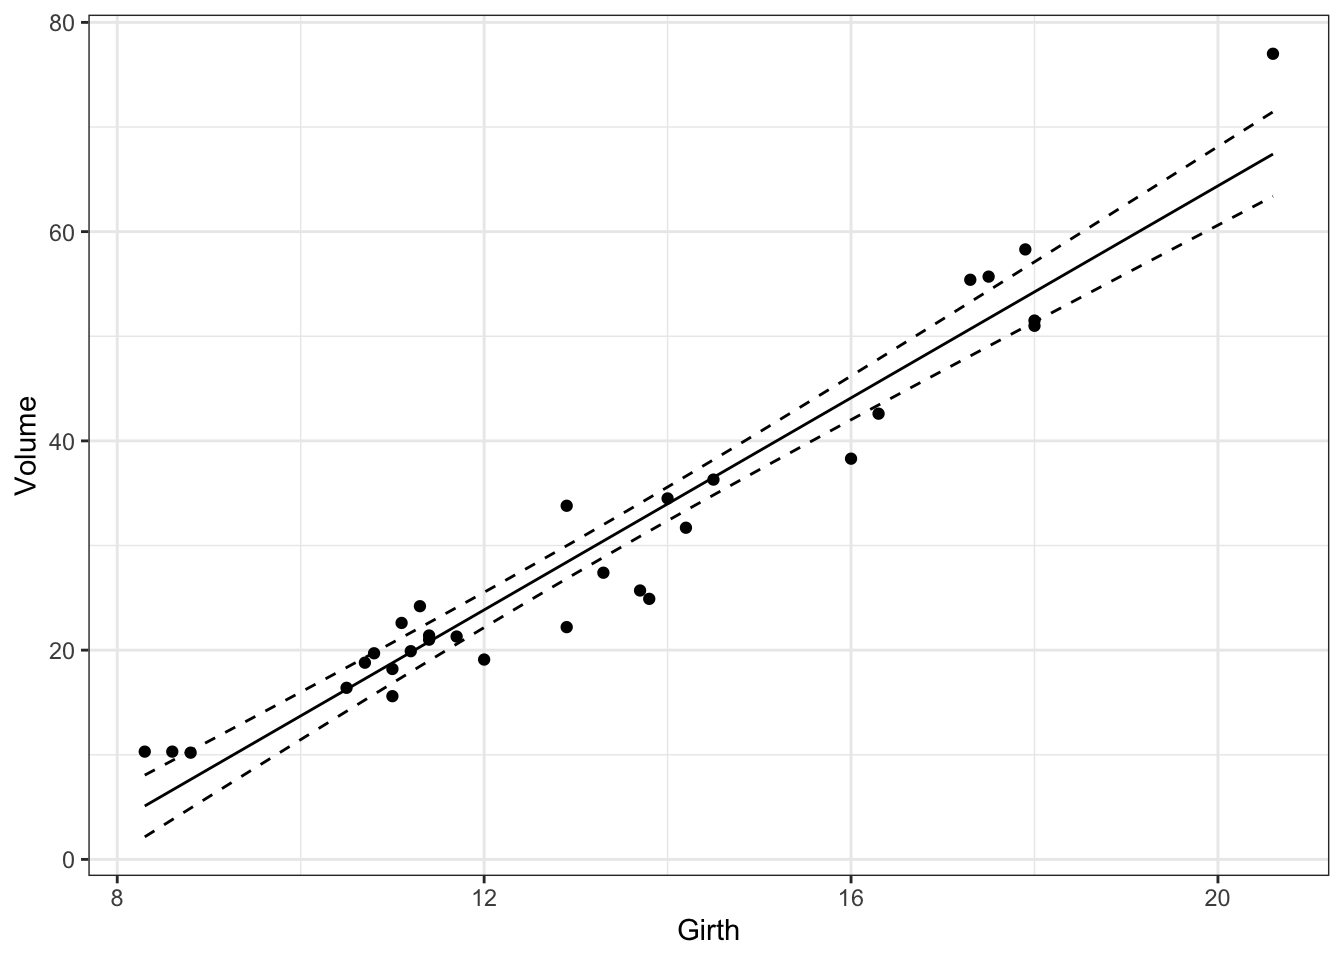 Estimated relationship between Volume and Girth for black cherry trees with 95% confidence intervals.